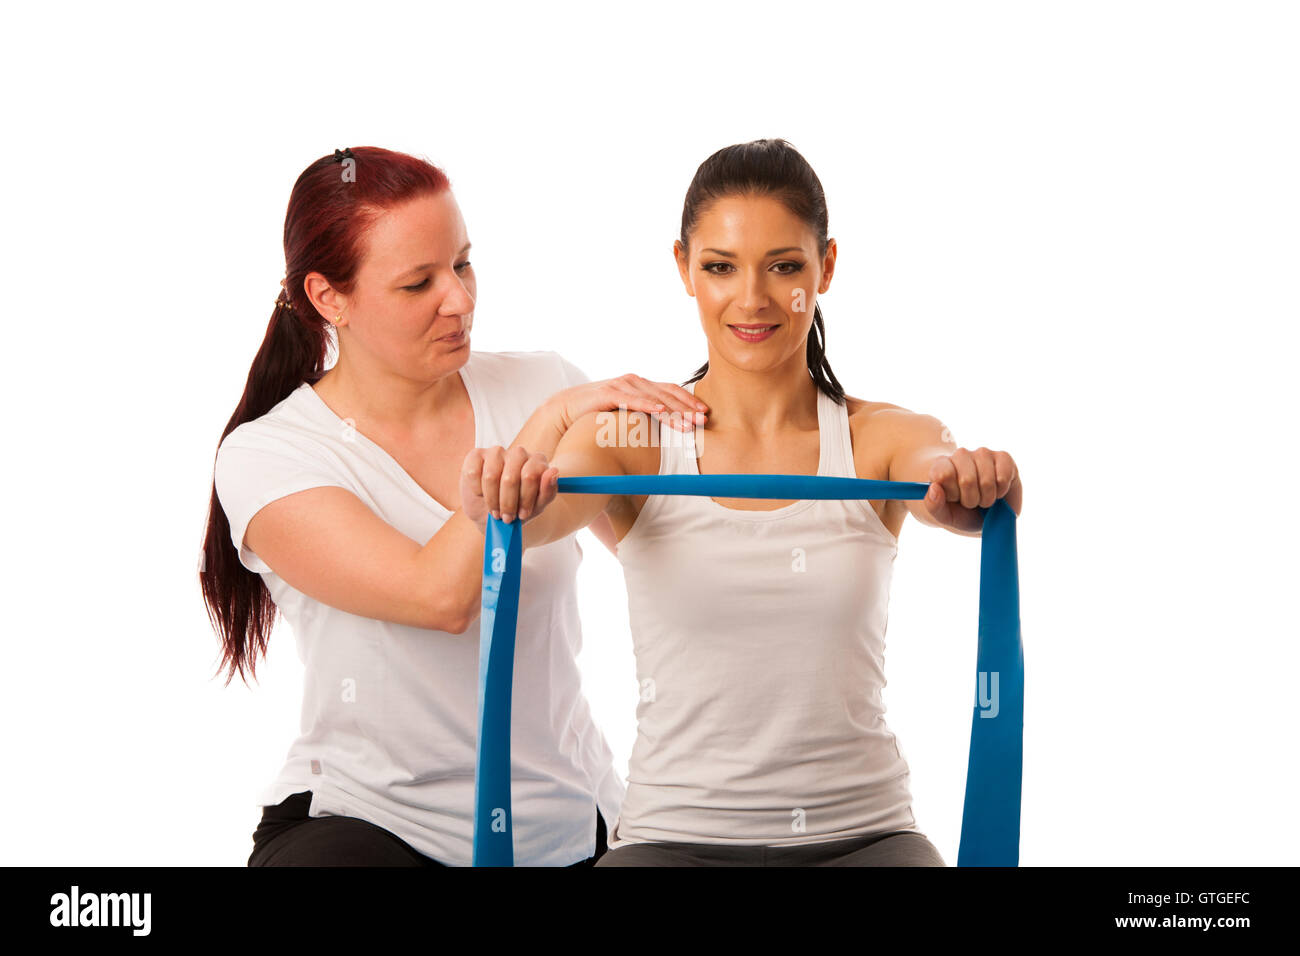 Physiotherapy - therapist doing arm straightening exercises with a patient to recover strength after injury Stock Photo